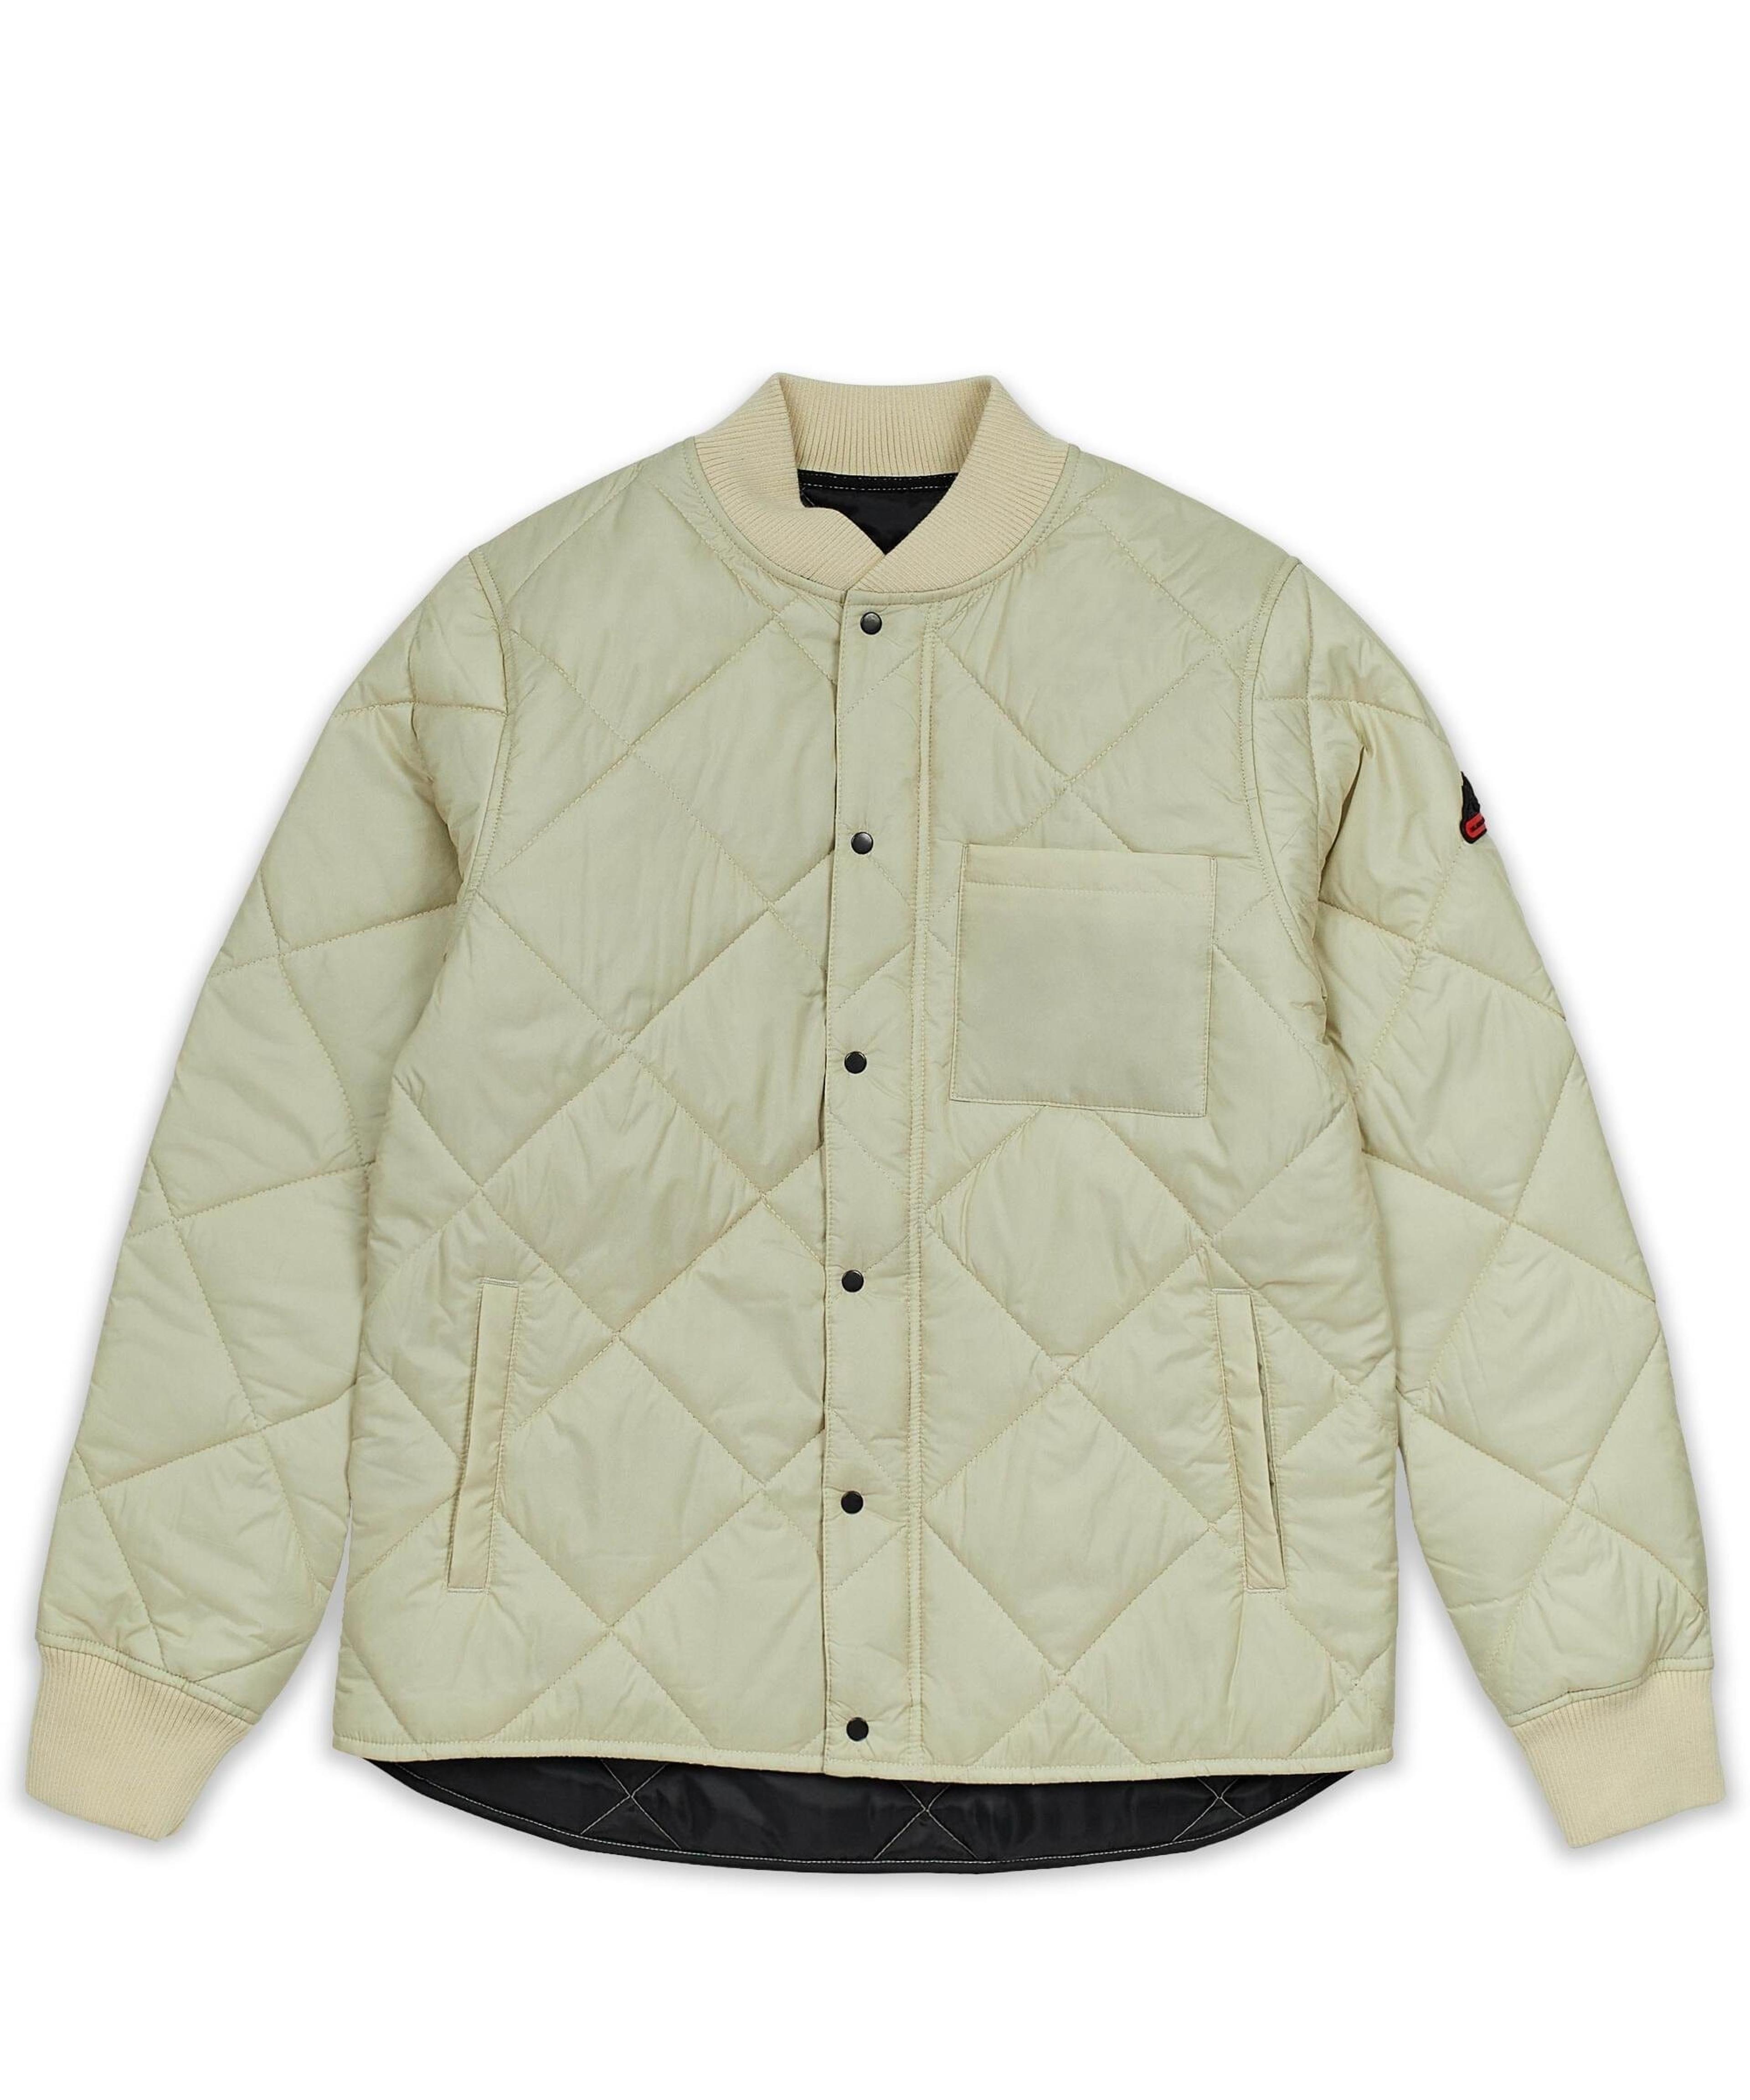 Alternate View 1 of Quilted Shirt Jacket With Lining - Oatmeal